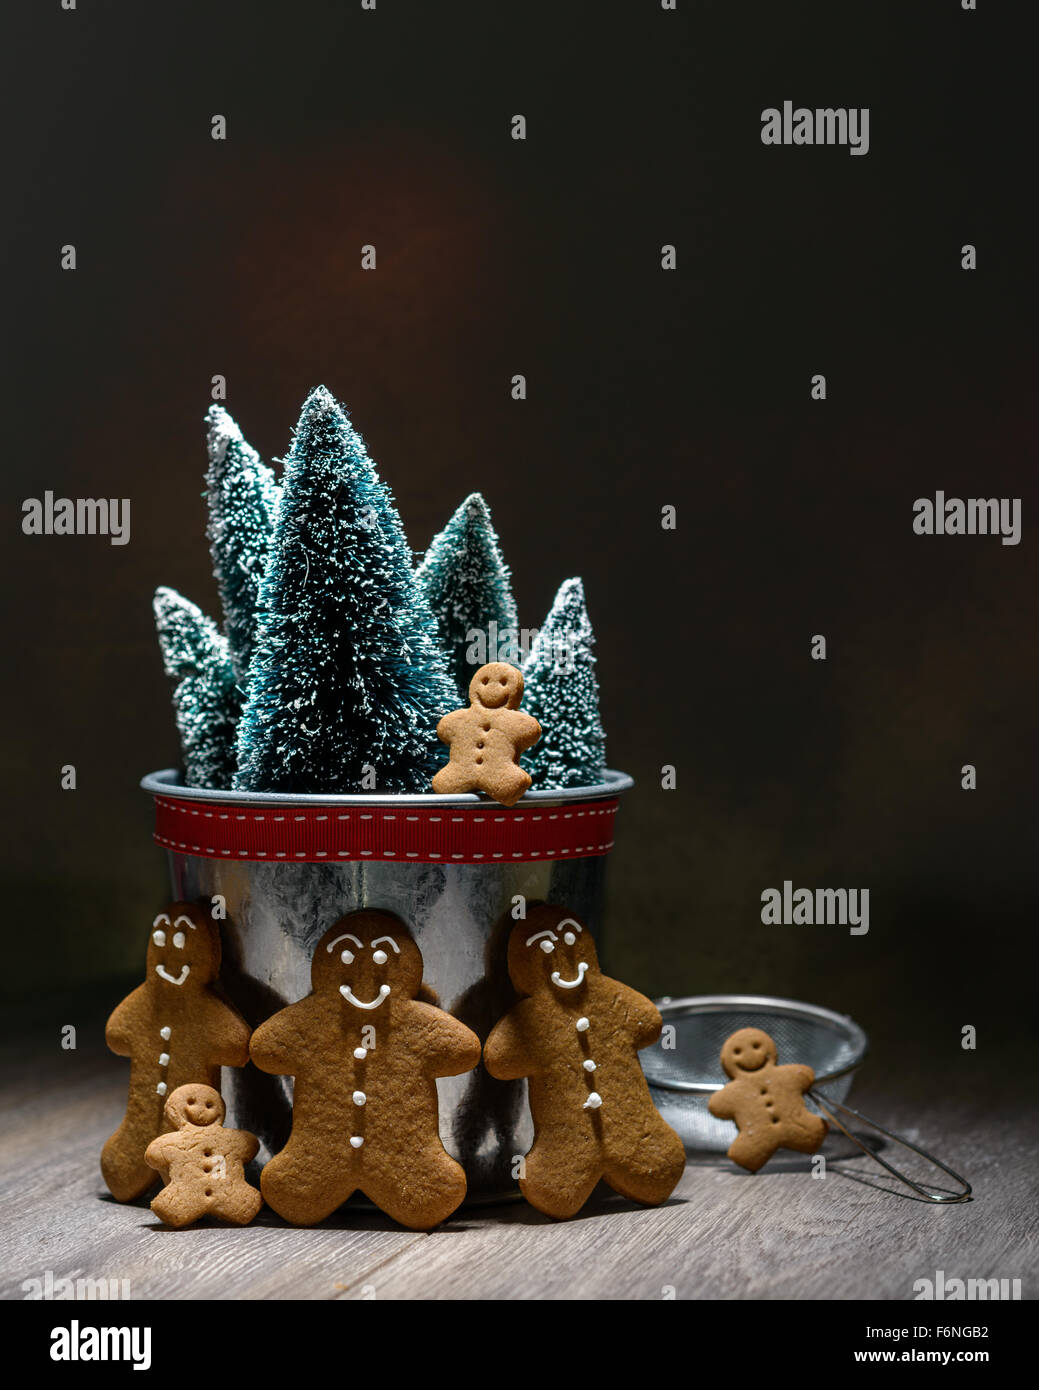 Low key image of homemade gingerbread family with Christmas trees Stock Photo